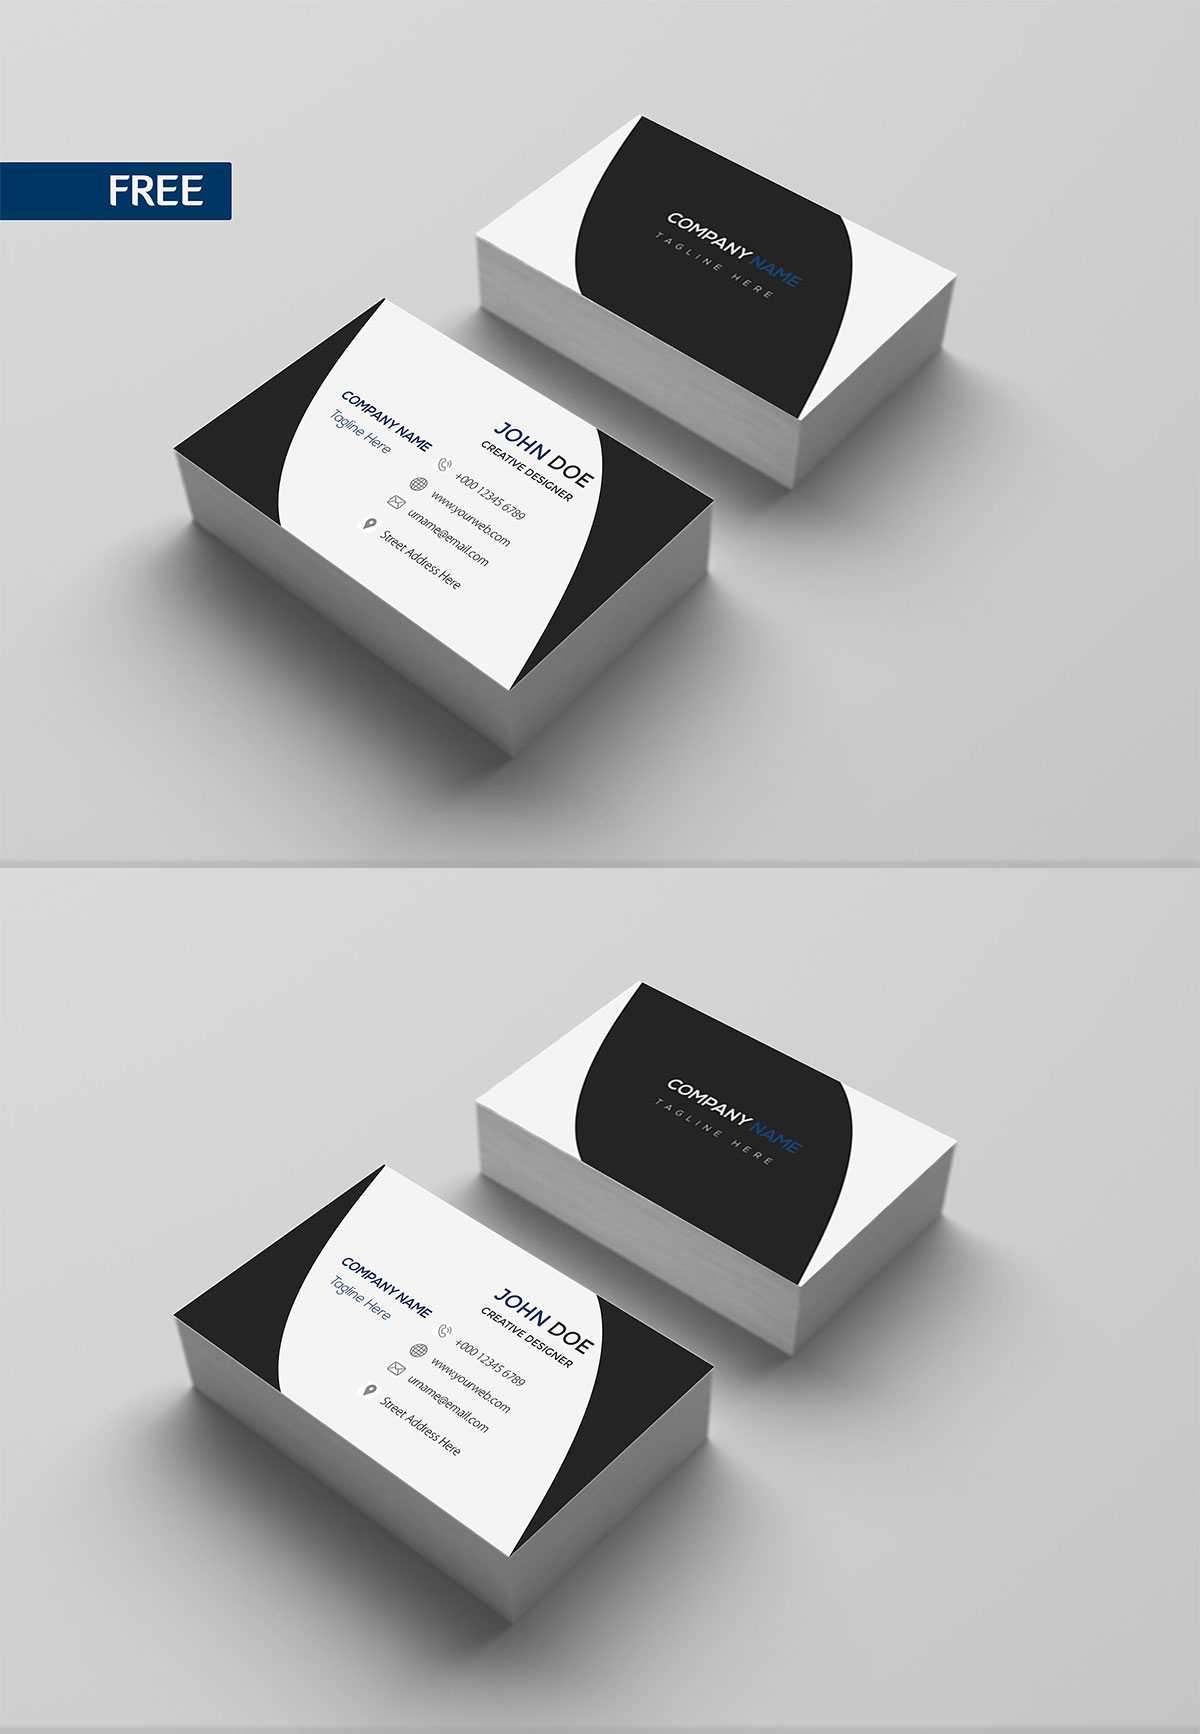 Free Print Design Business Card Template - Creativetacos Intended For Free Template Business Cards To Print